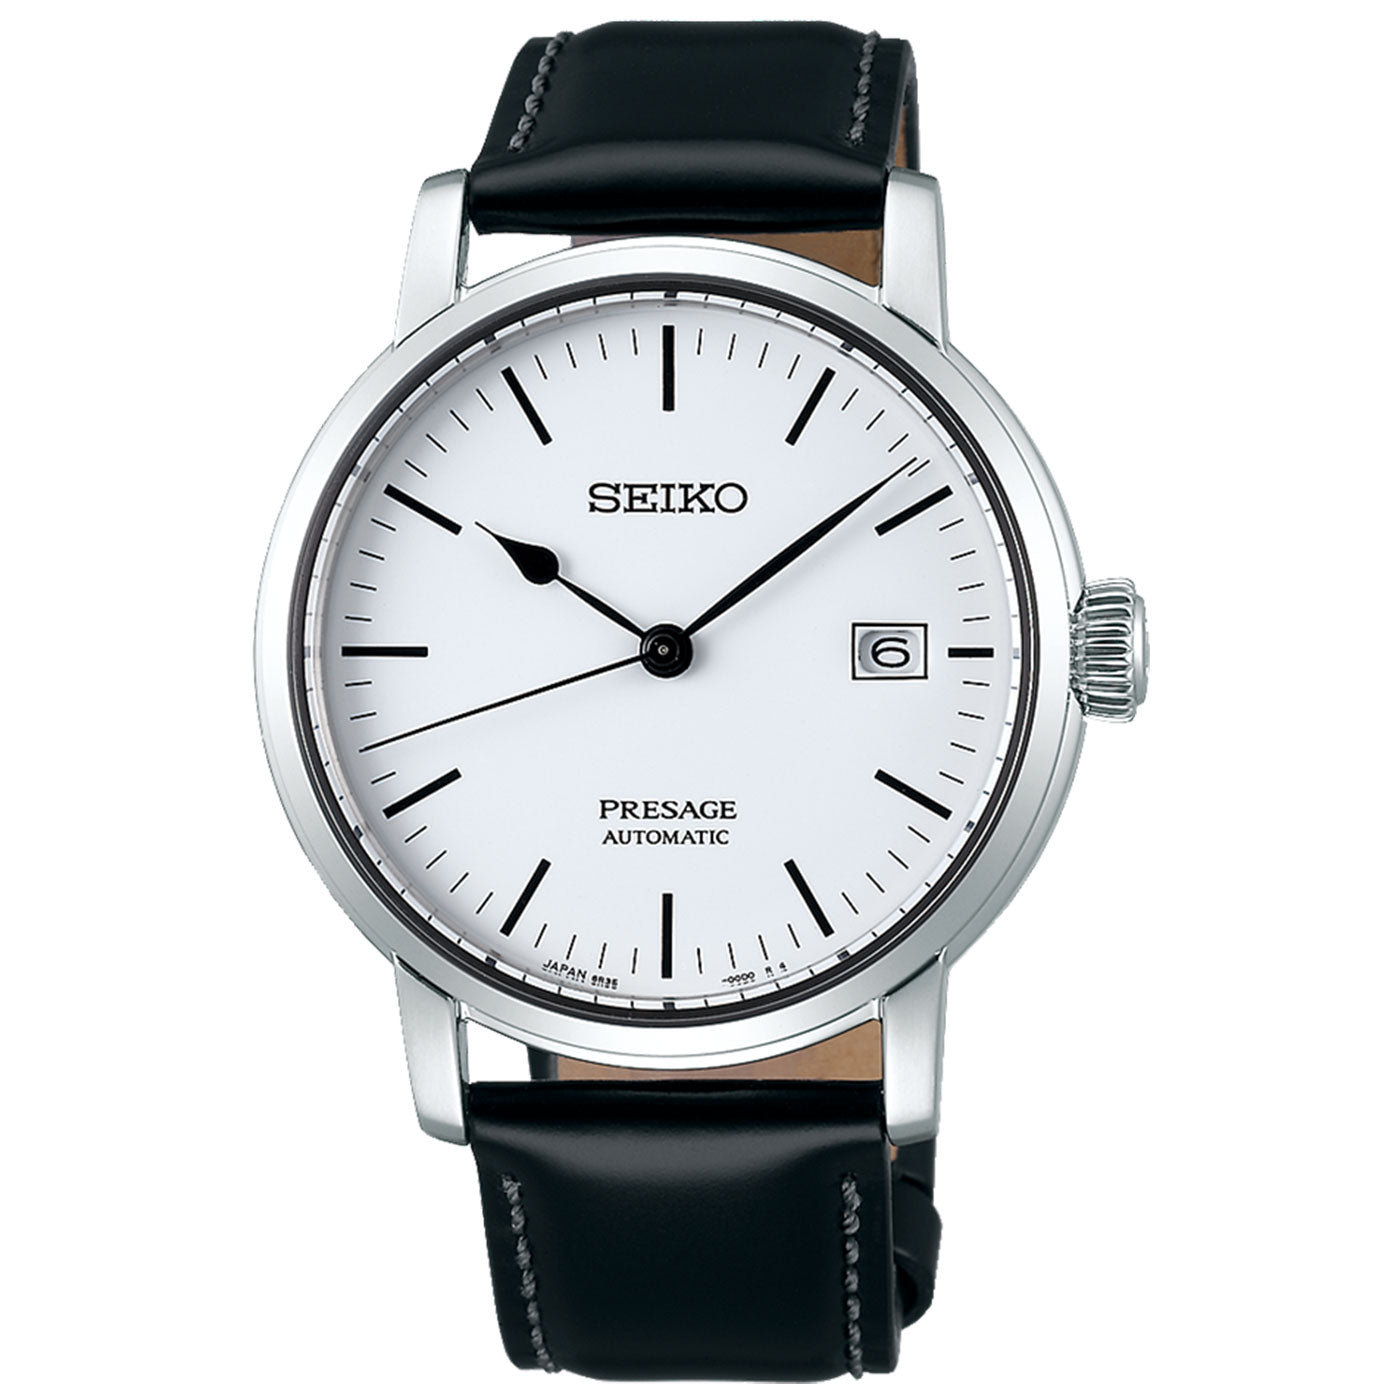 Seiko Presage Craftmanship Series Automatic With Manual Winding 39.9mm Watch